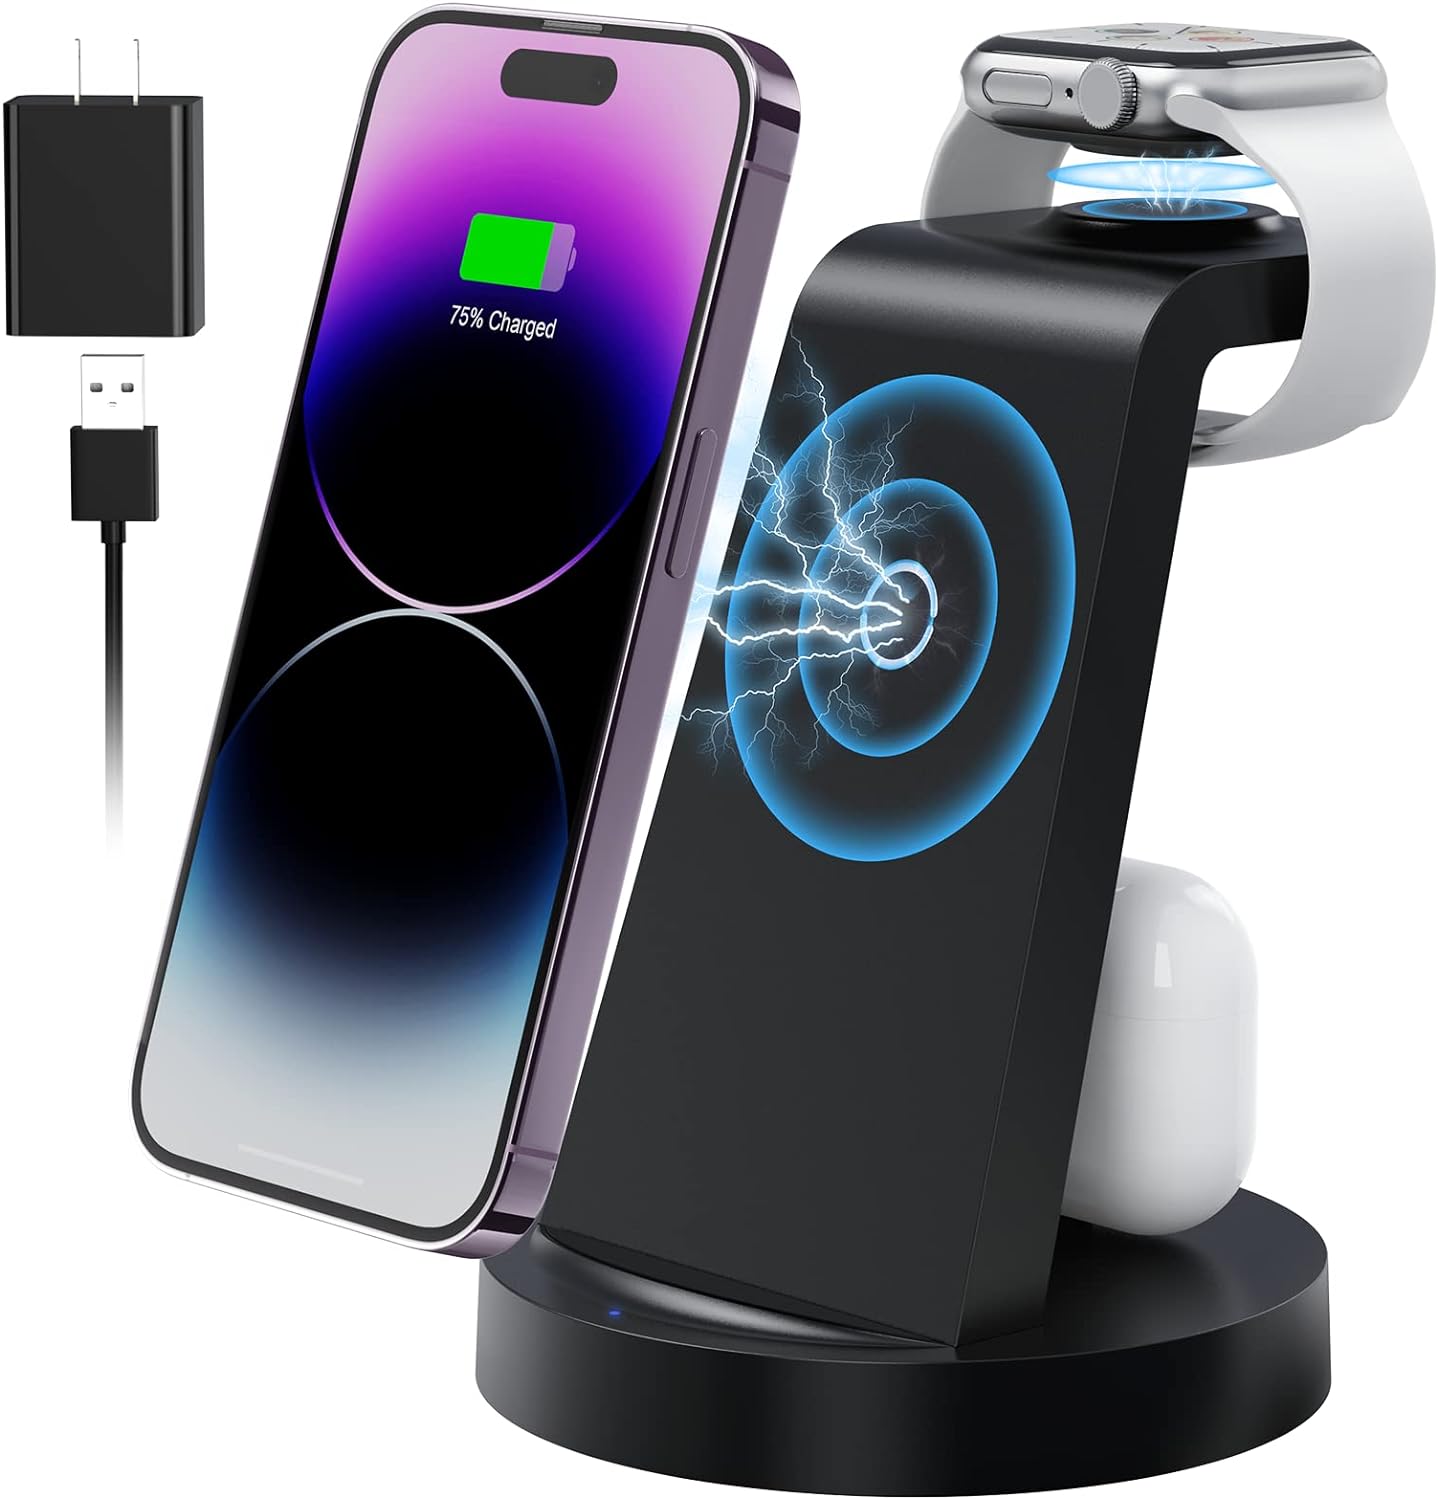 The 3-in-1 iPhone charger stand impresses with its sleek design and functionality. Its ability to simultaneously charge my iPhone, AirPods, and Apple Watch makes it a convenient solution for decluttering my charging space. The adjustable stand provides a comfortable viewing angle, and the build quality feels sturdy. However, the charging speed could be faster for all devices. Overall, it' a practical accessory for Apple enthusiasts seeking a tidy charging solution.